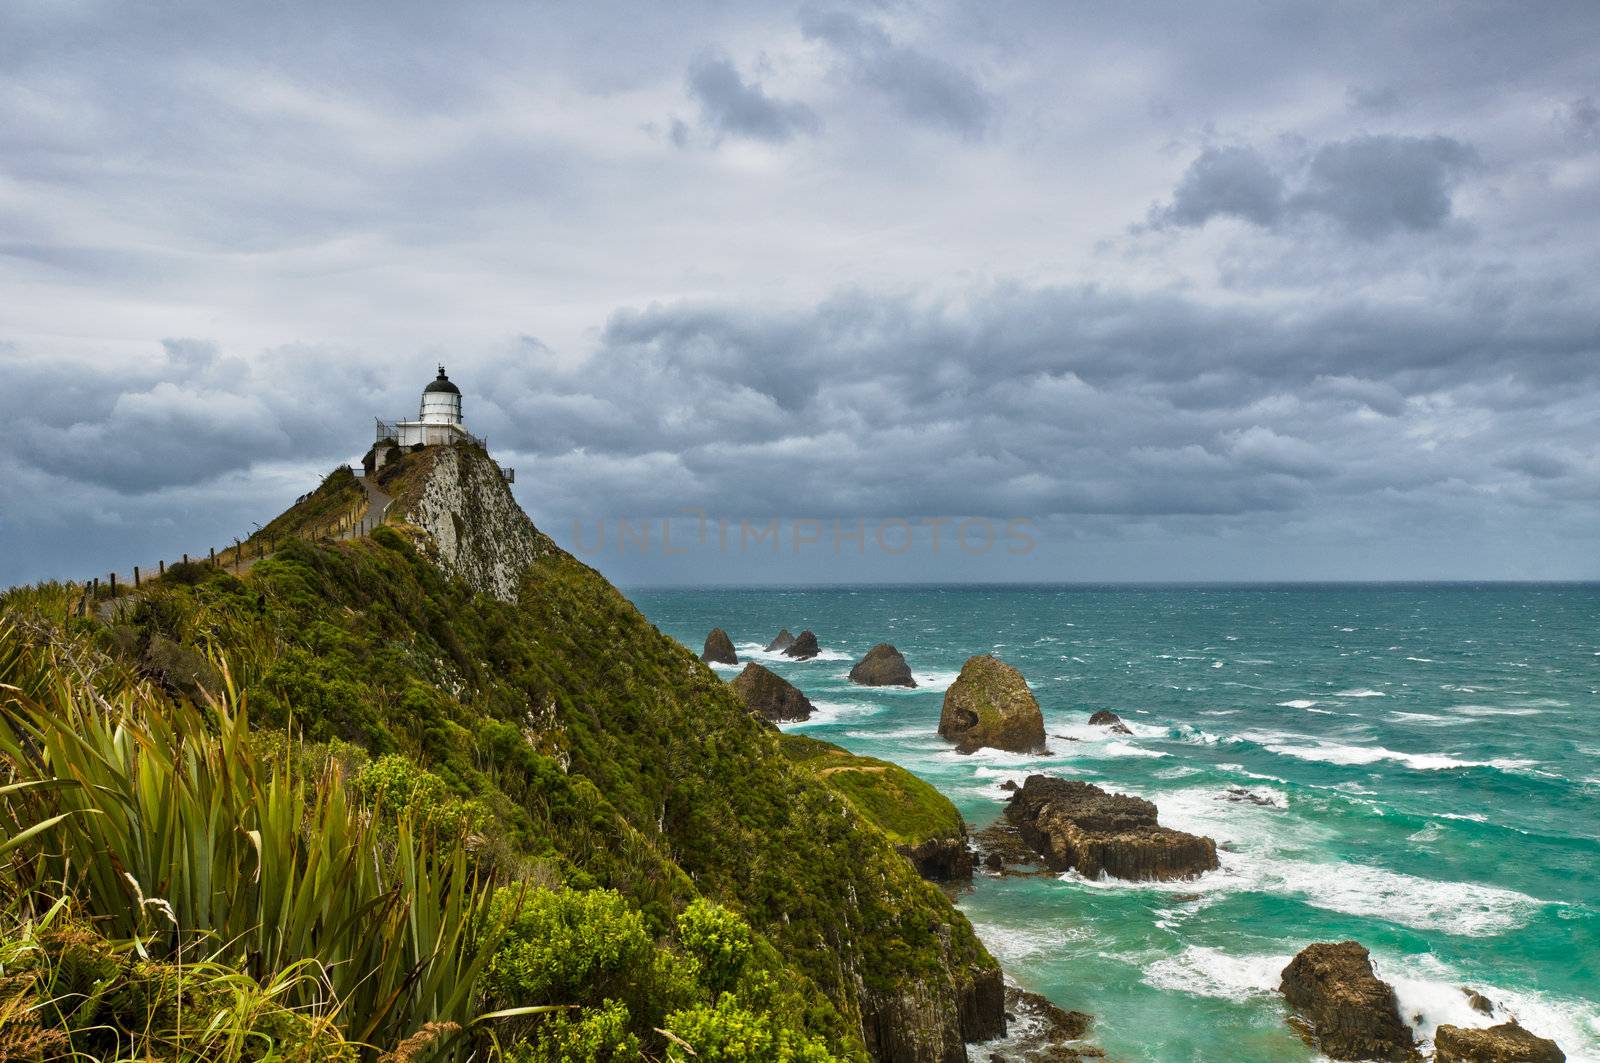 Nugget Point Light House an dark clouds in the sky, Catlins, New Zealand